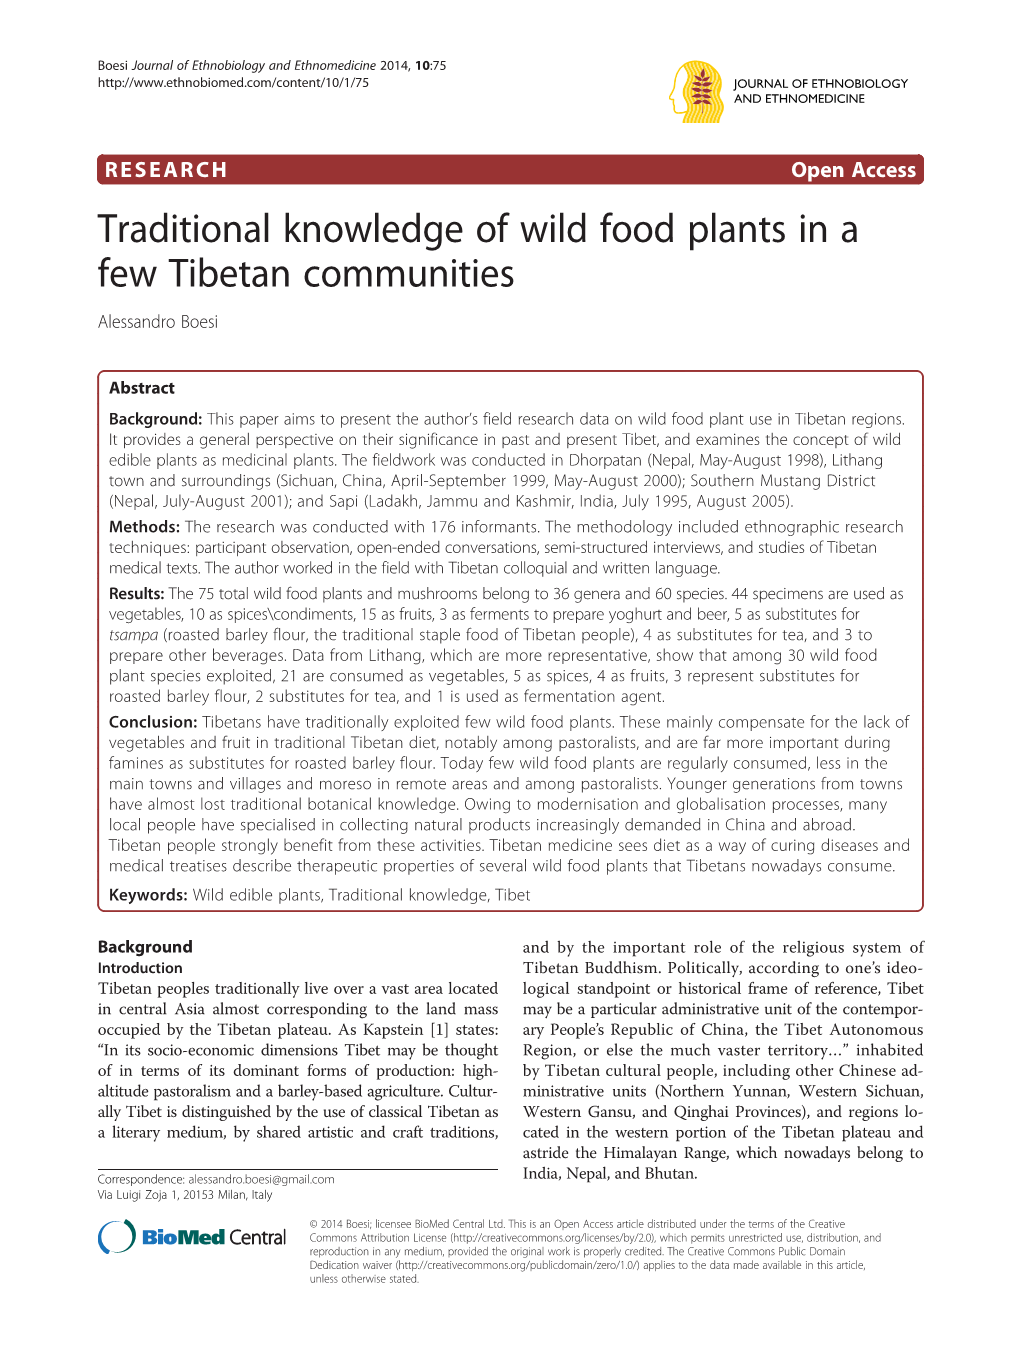 Traditional Knowledge of Wild Food Plants in a Few Tibetan Communities Alessandro Boesi